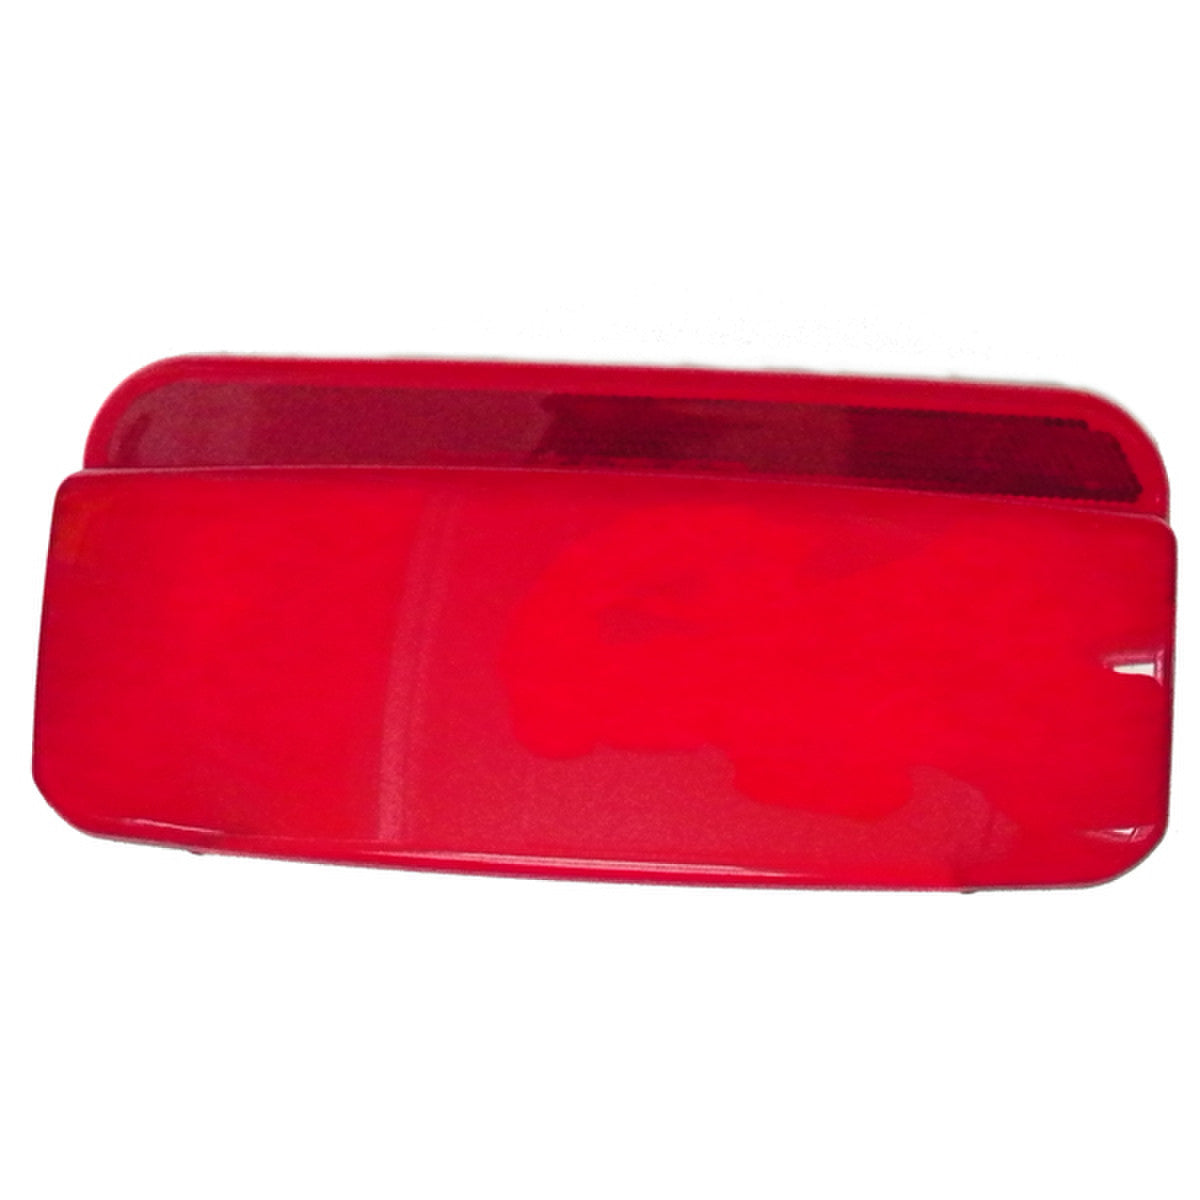 Fasteners Unlimited CMD-89-187L Replacement Red Lens for Surface Mount LED Tail Light